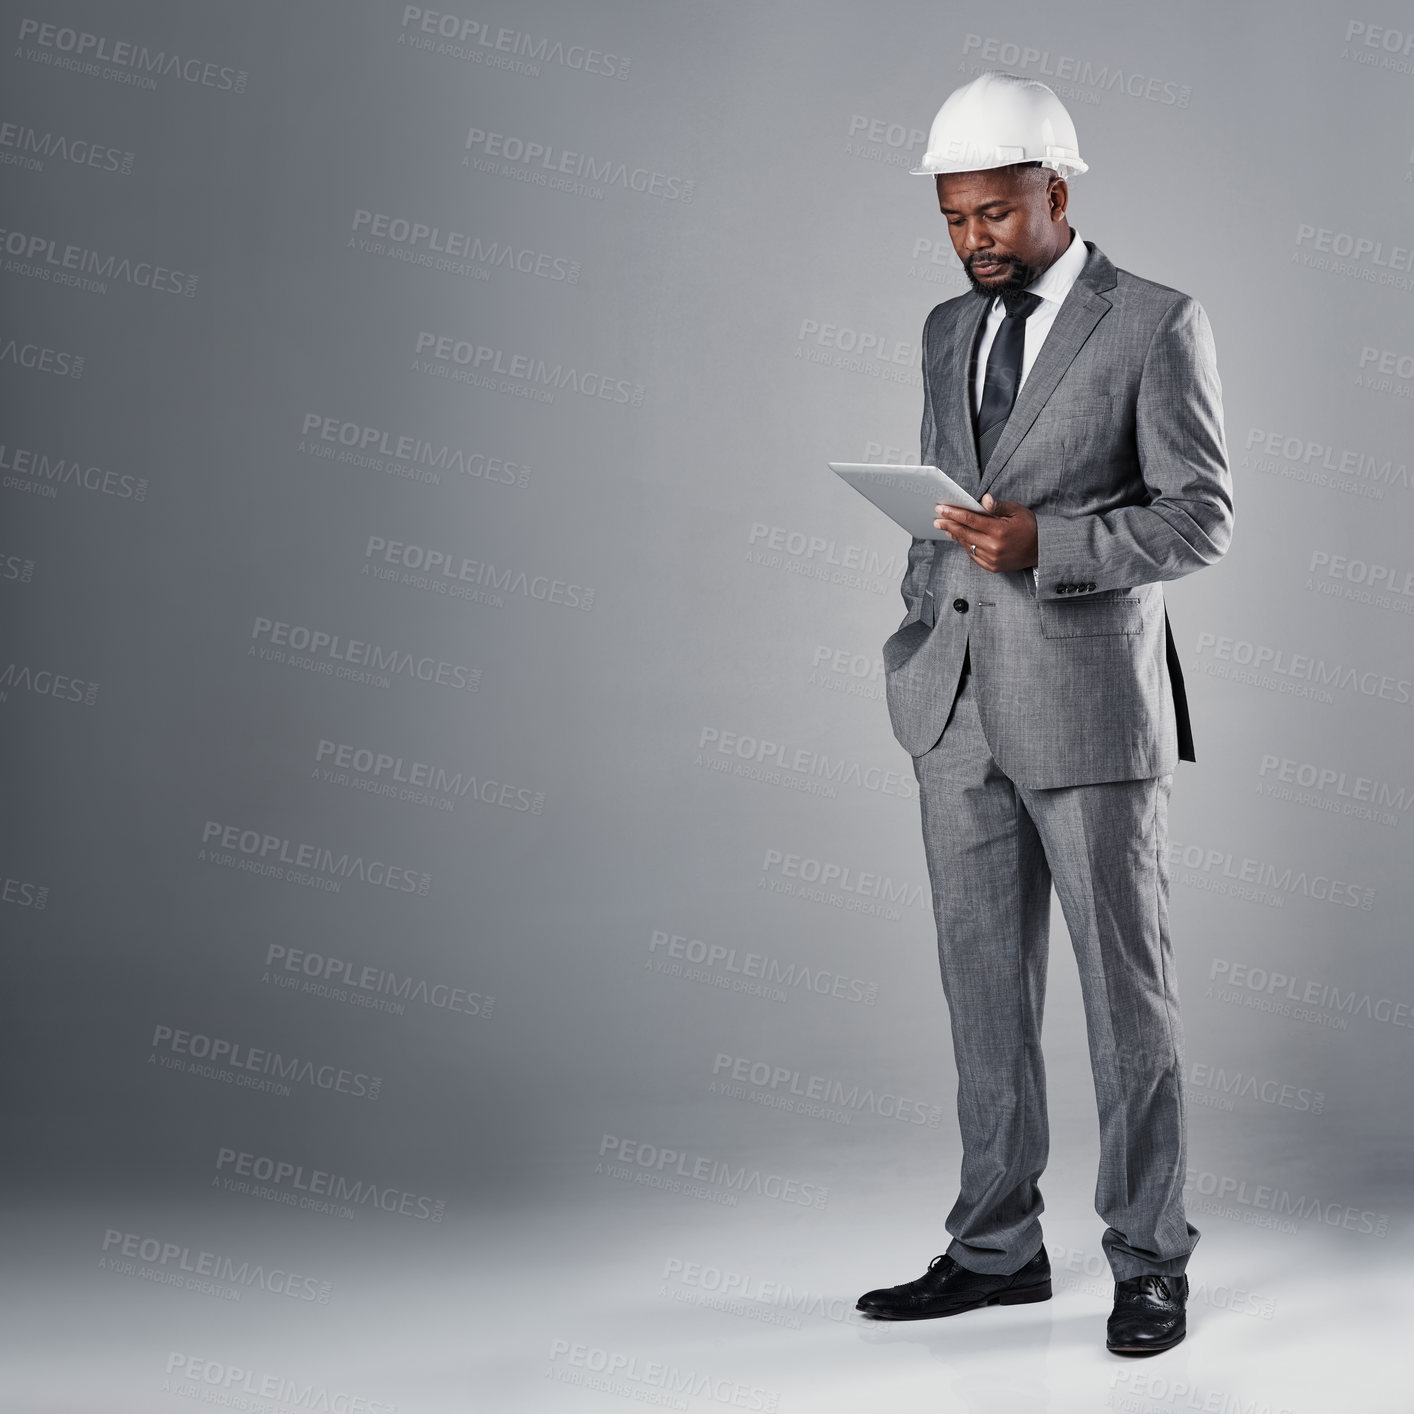 Buy stock photo Shot of a well-dressed civil engineer using his tablet while standing in the studio